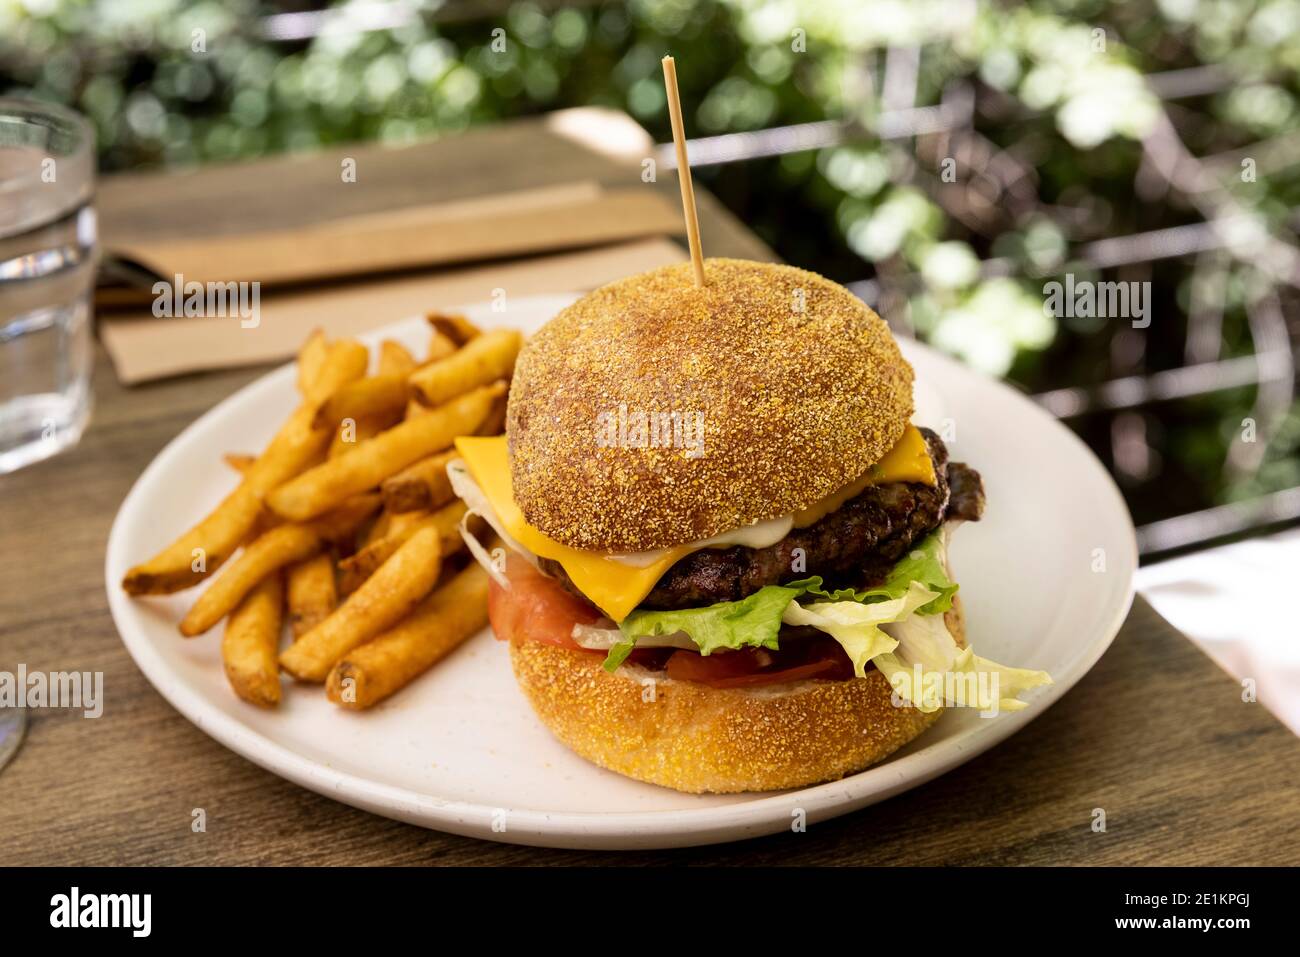 A delicious cheeseburger and fries served on an outside table Stock Photo